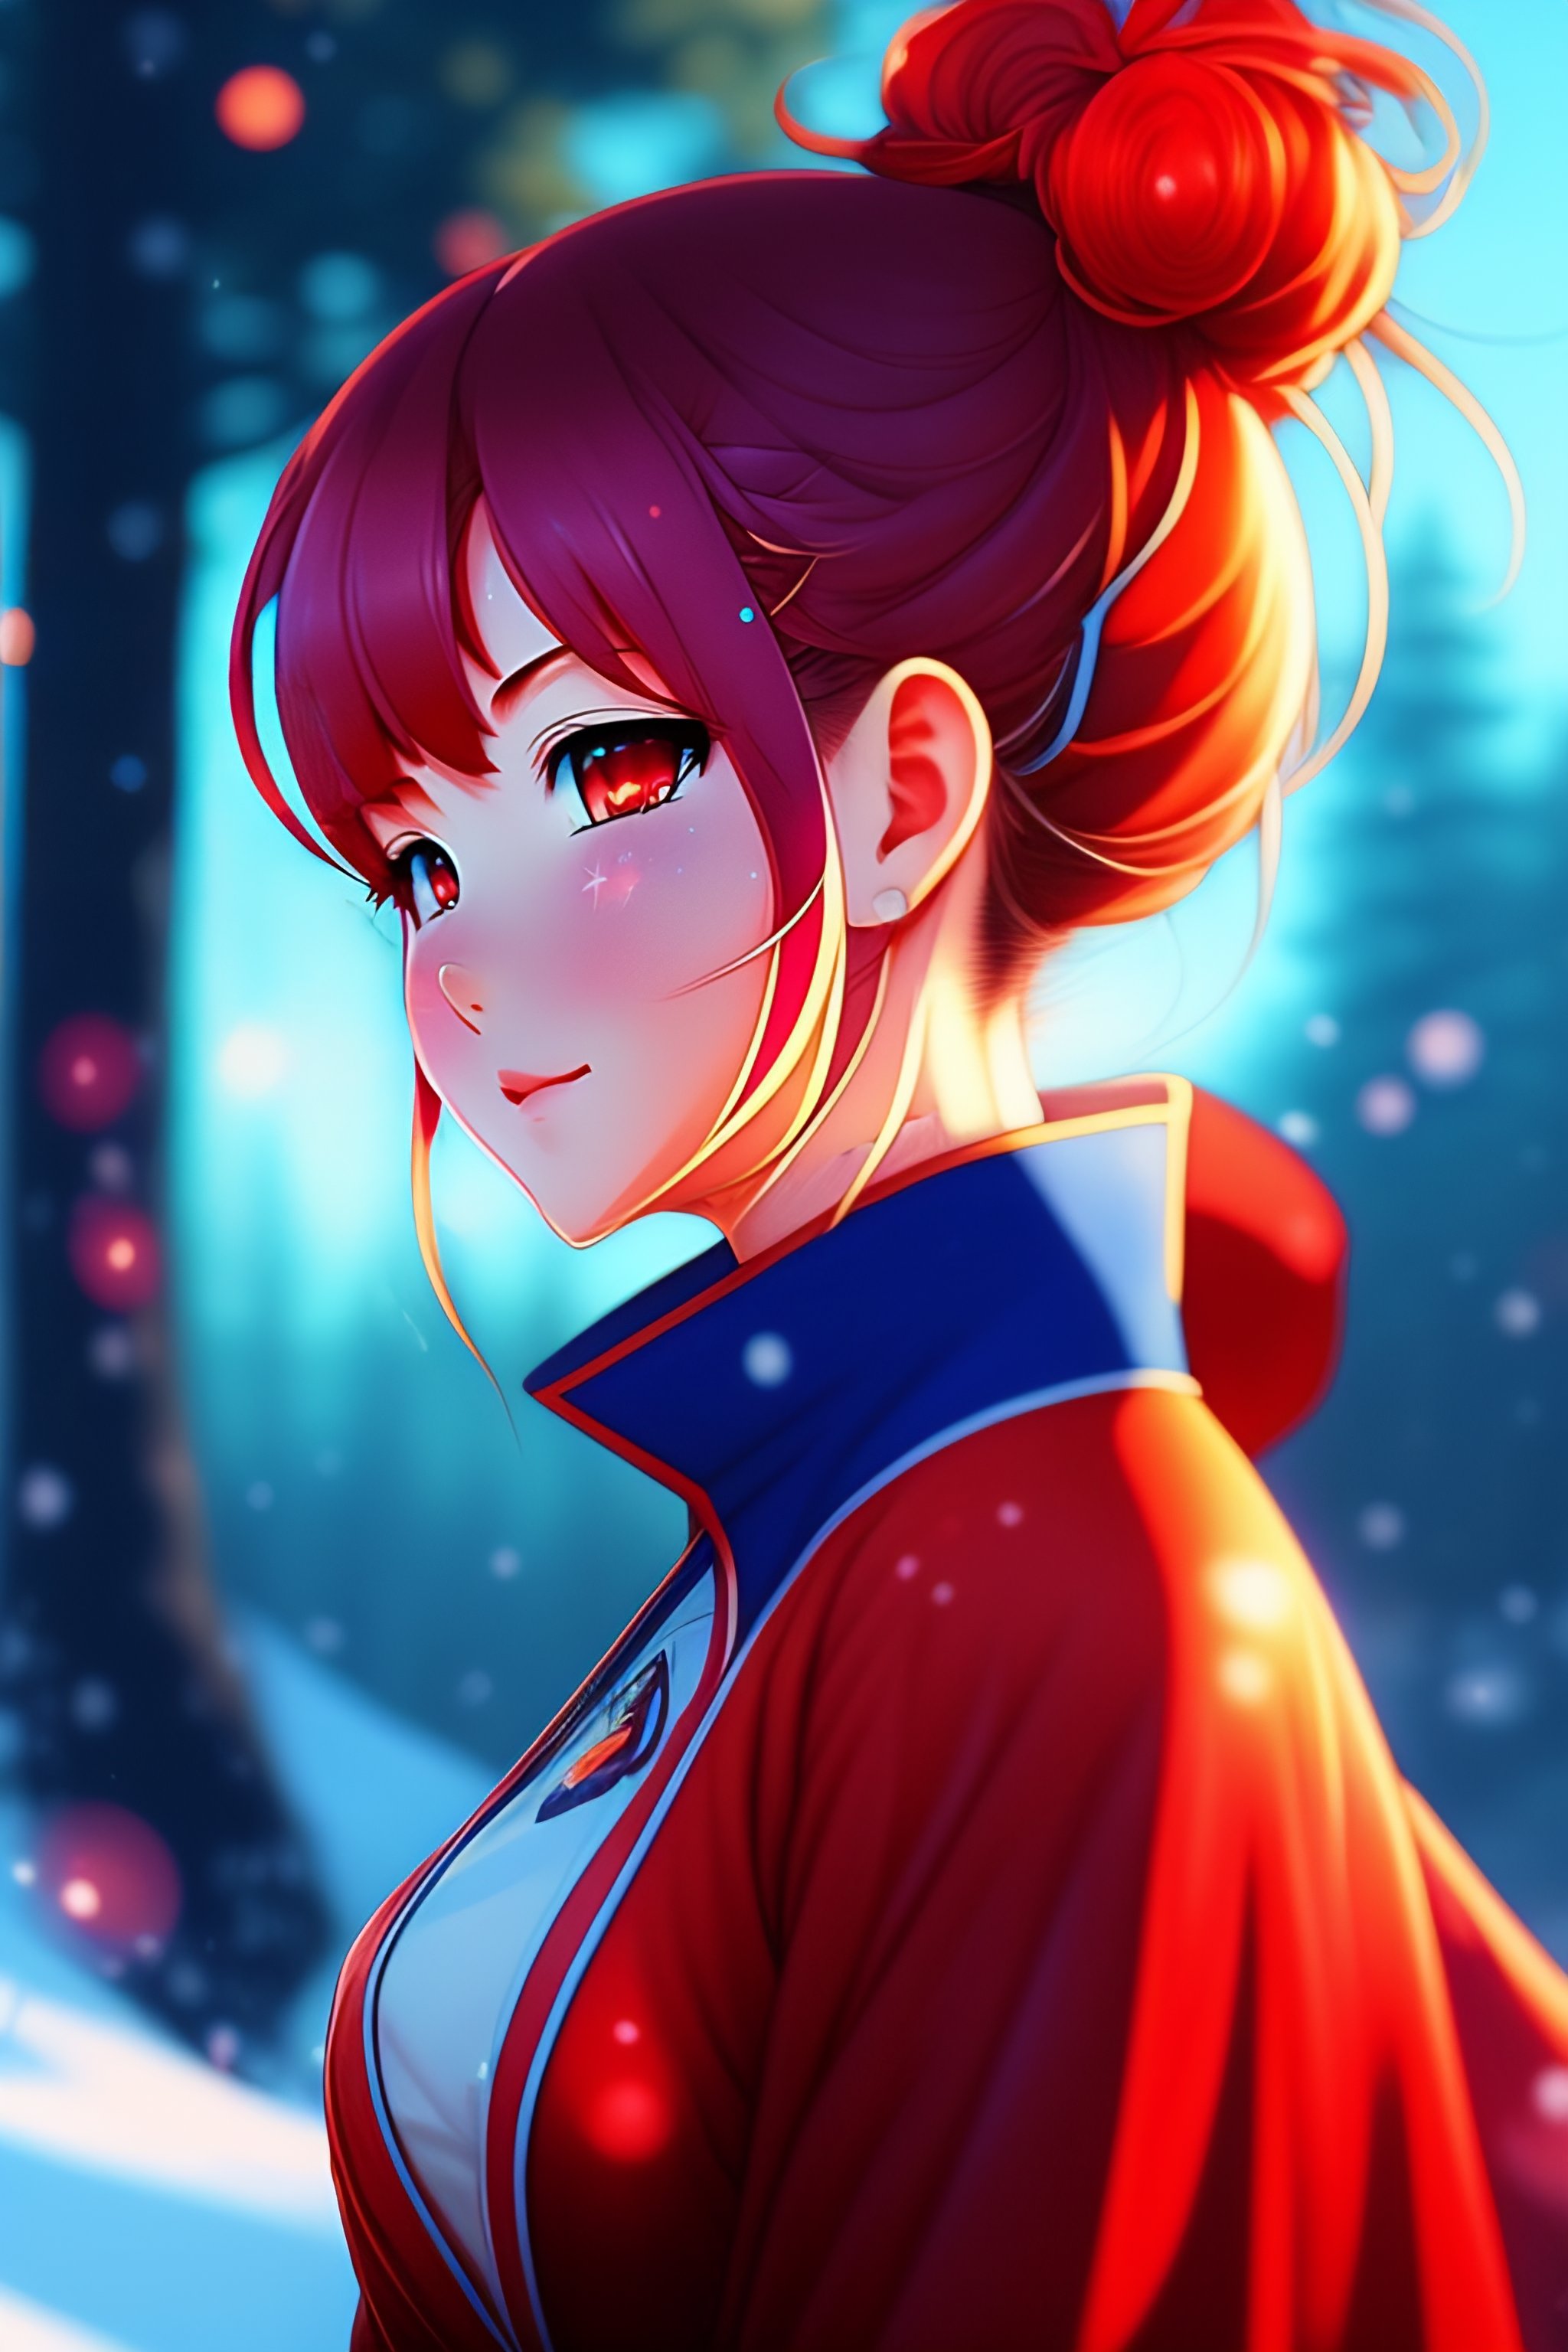 Profile picture of an anime girl with maroon hair